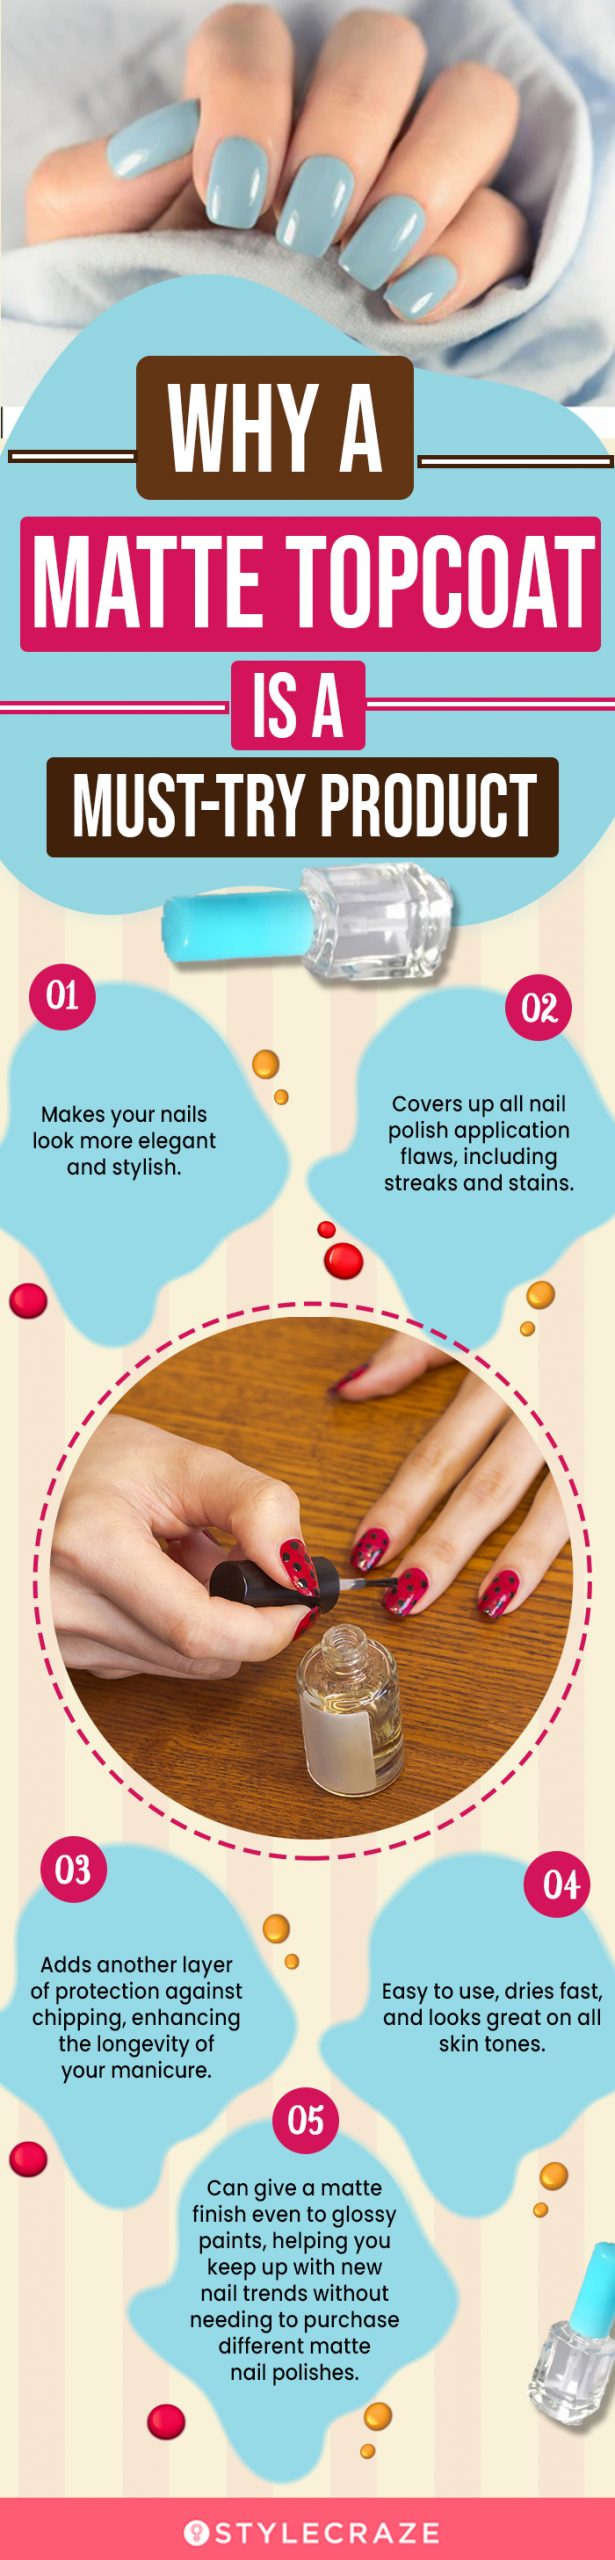 Why A Matte Topcoat Is A Must-Try Product (infographic)